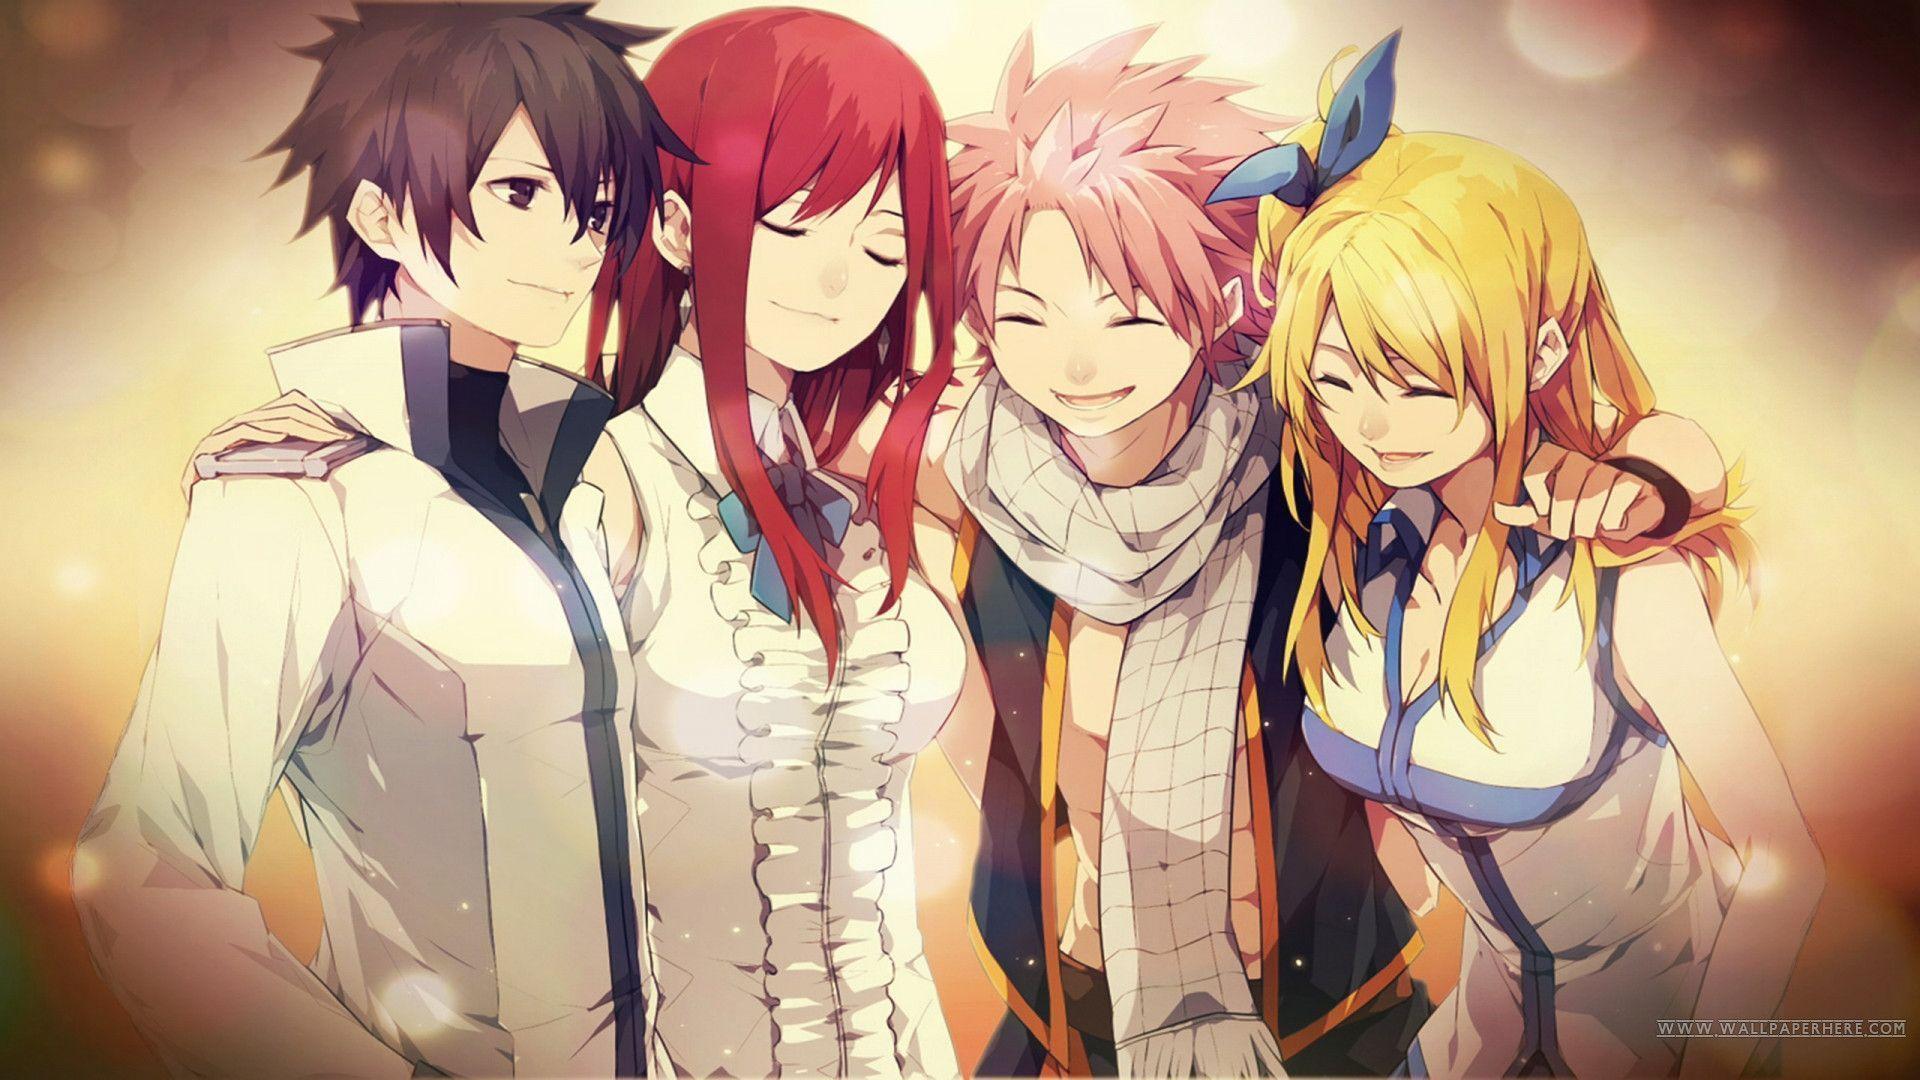 Wallpapers For > Fairy Tail Wallpapers Hd 1920x1080